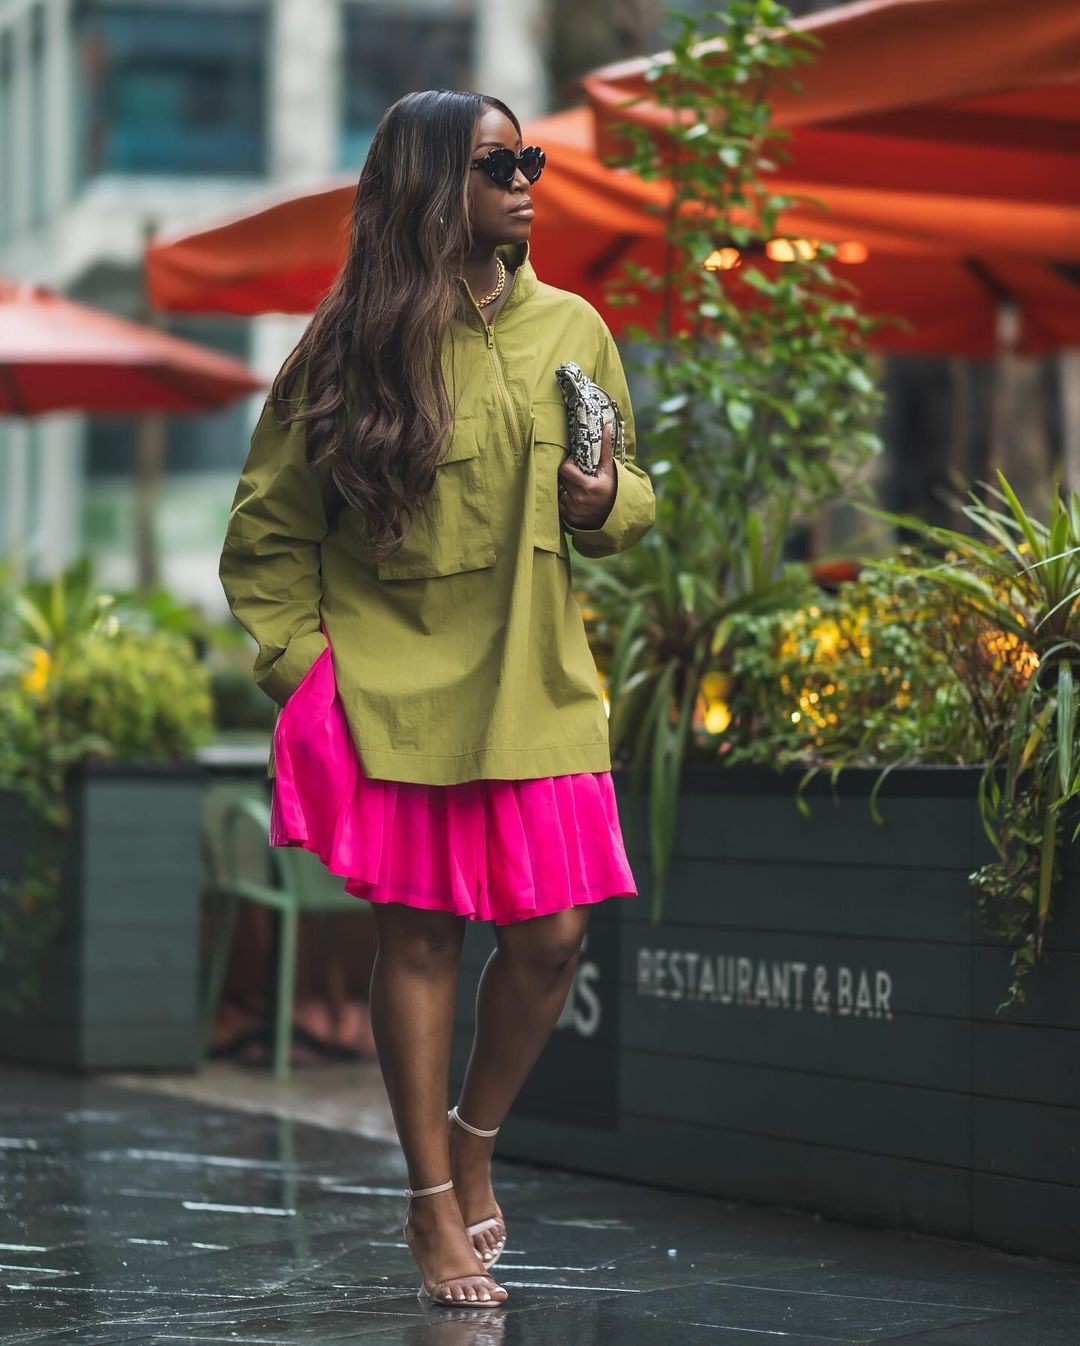 31 Chic Fall Styles for Women: Fashionable Outfits for Every Occasion